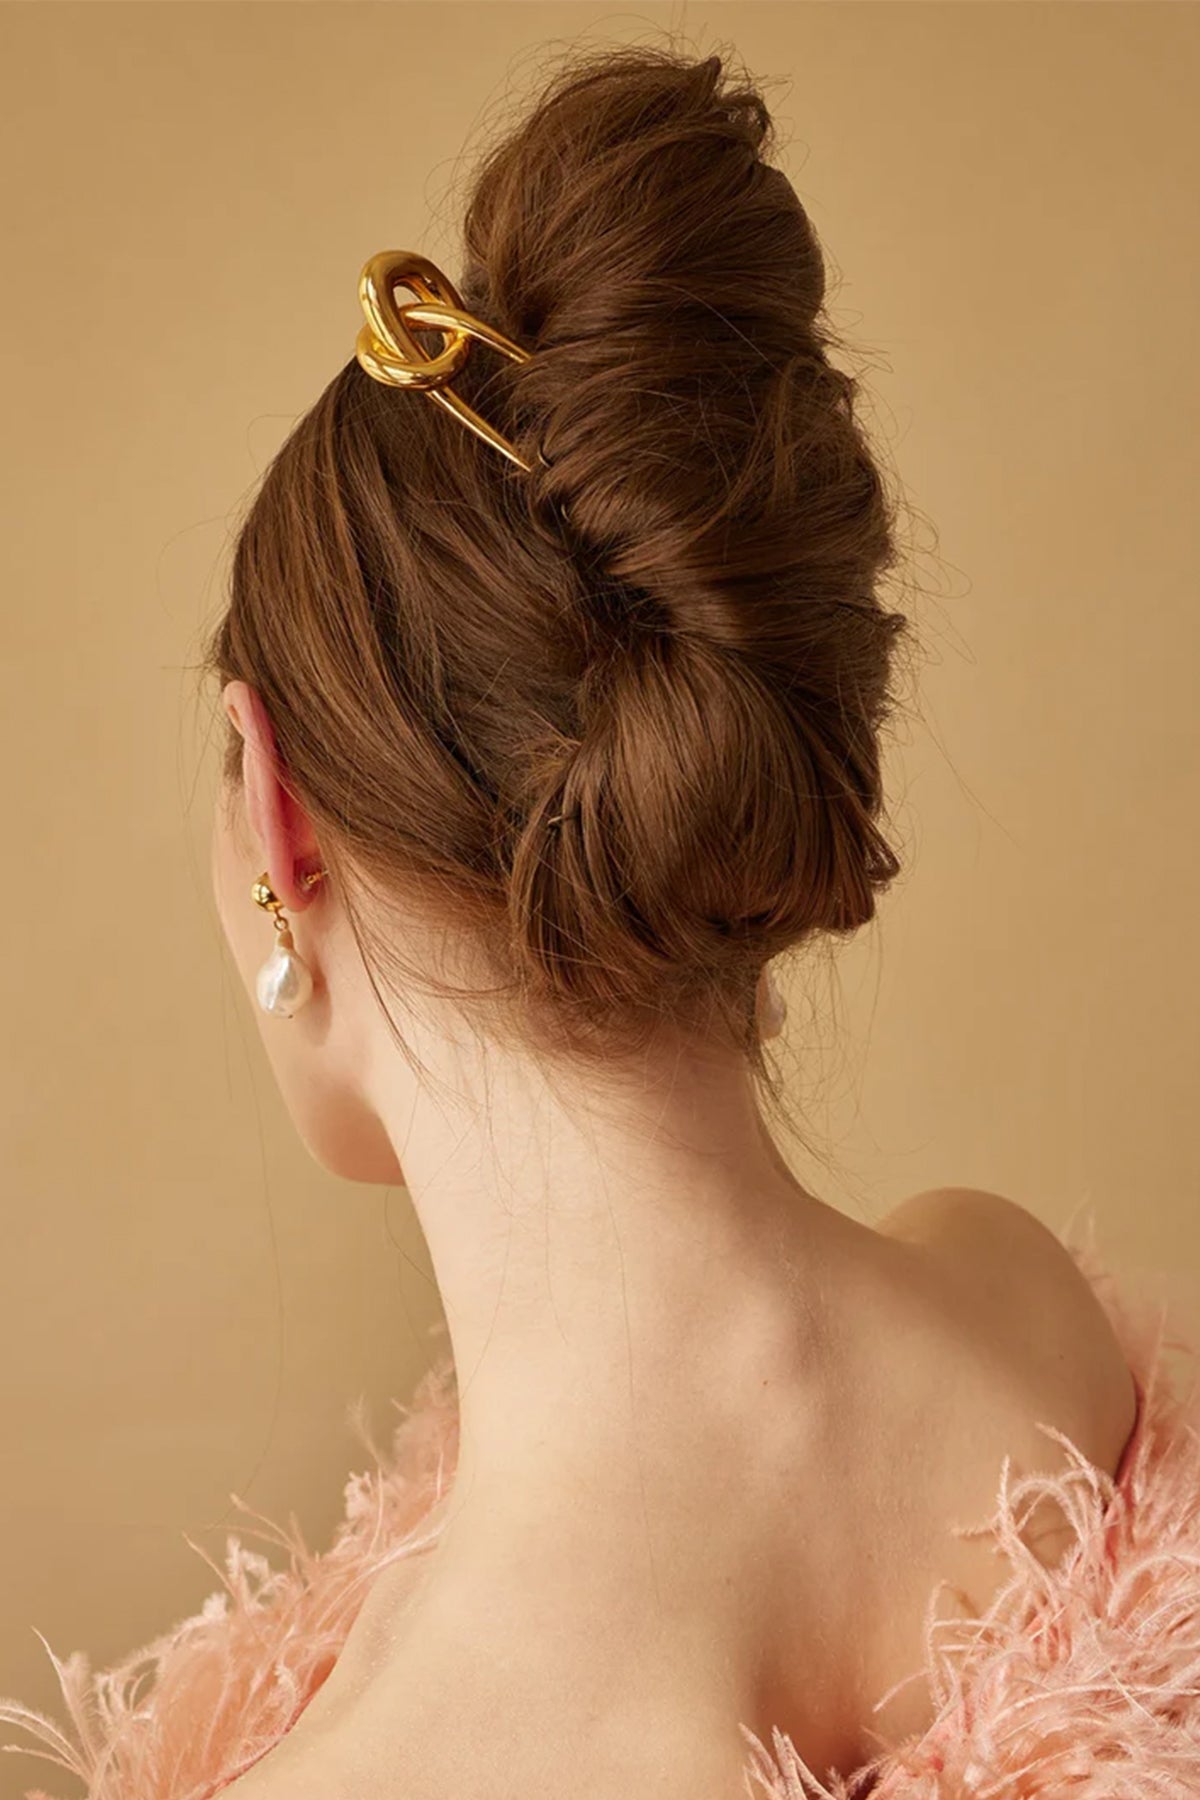 Glossy Knot Hair Pin in Gold - shop-olivia.com